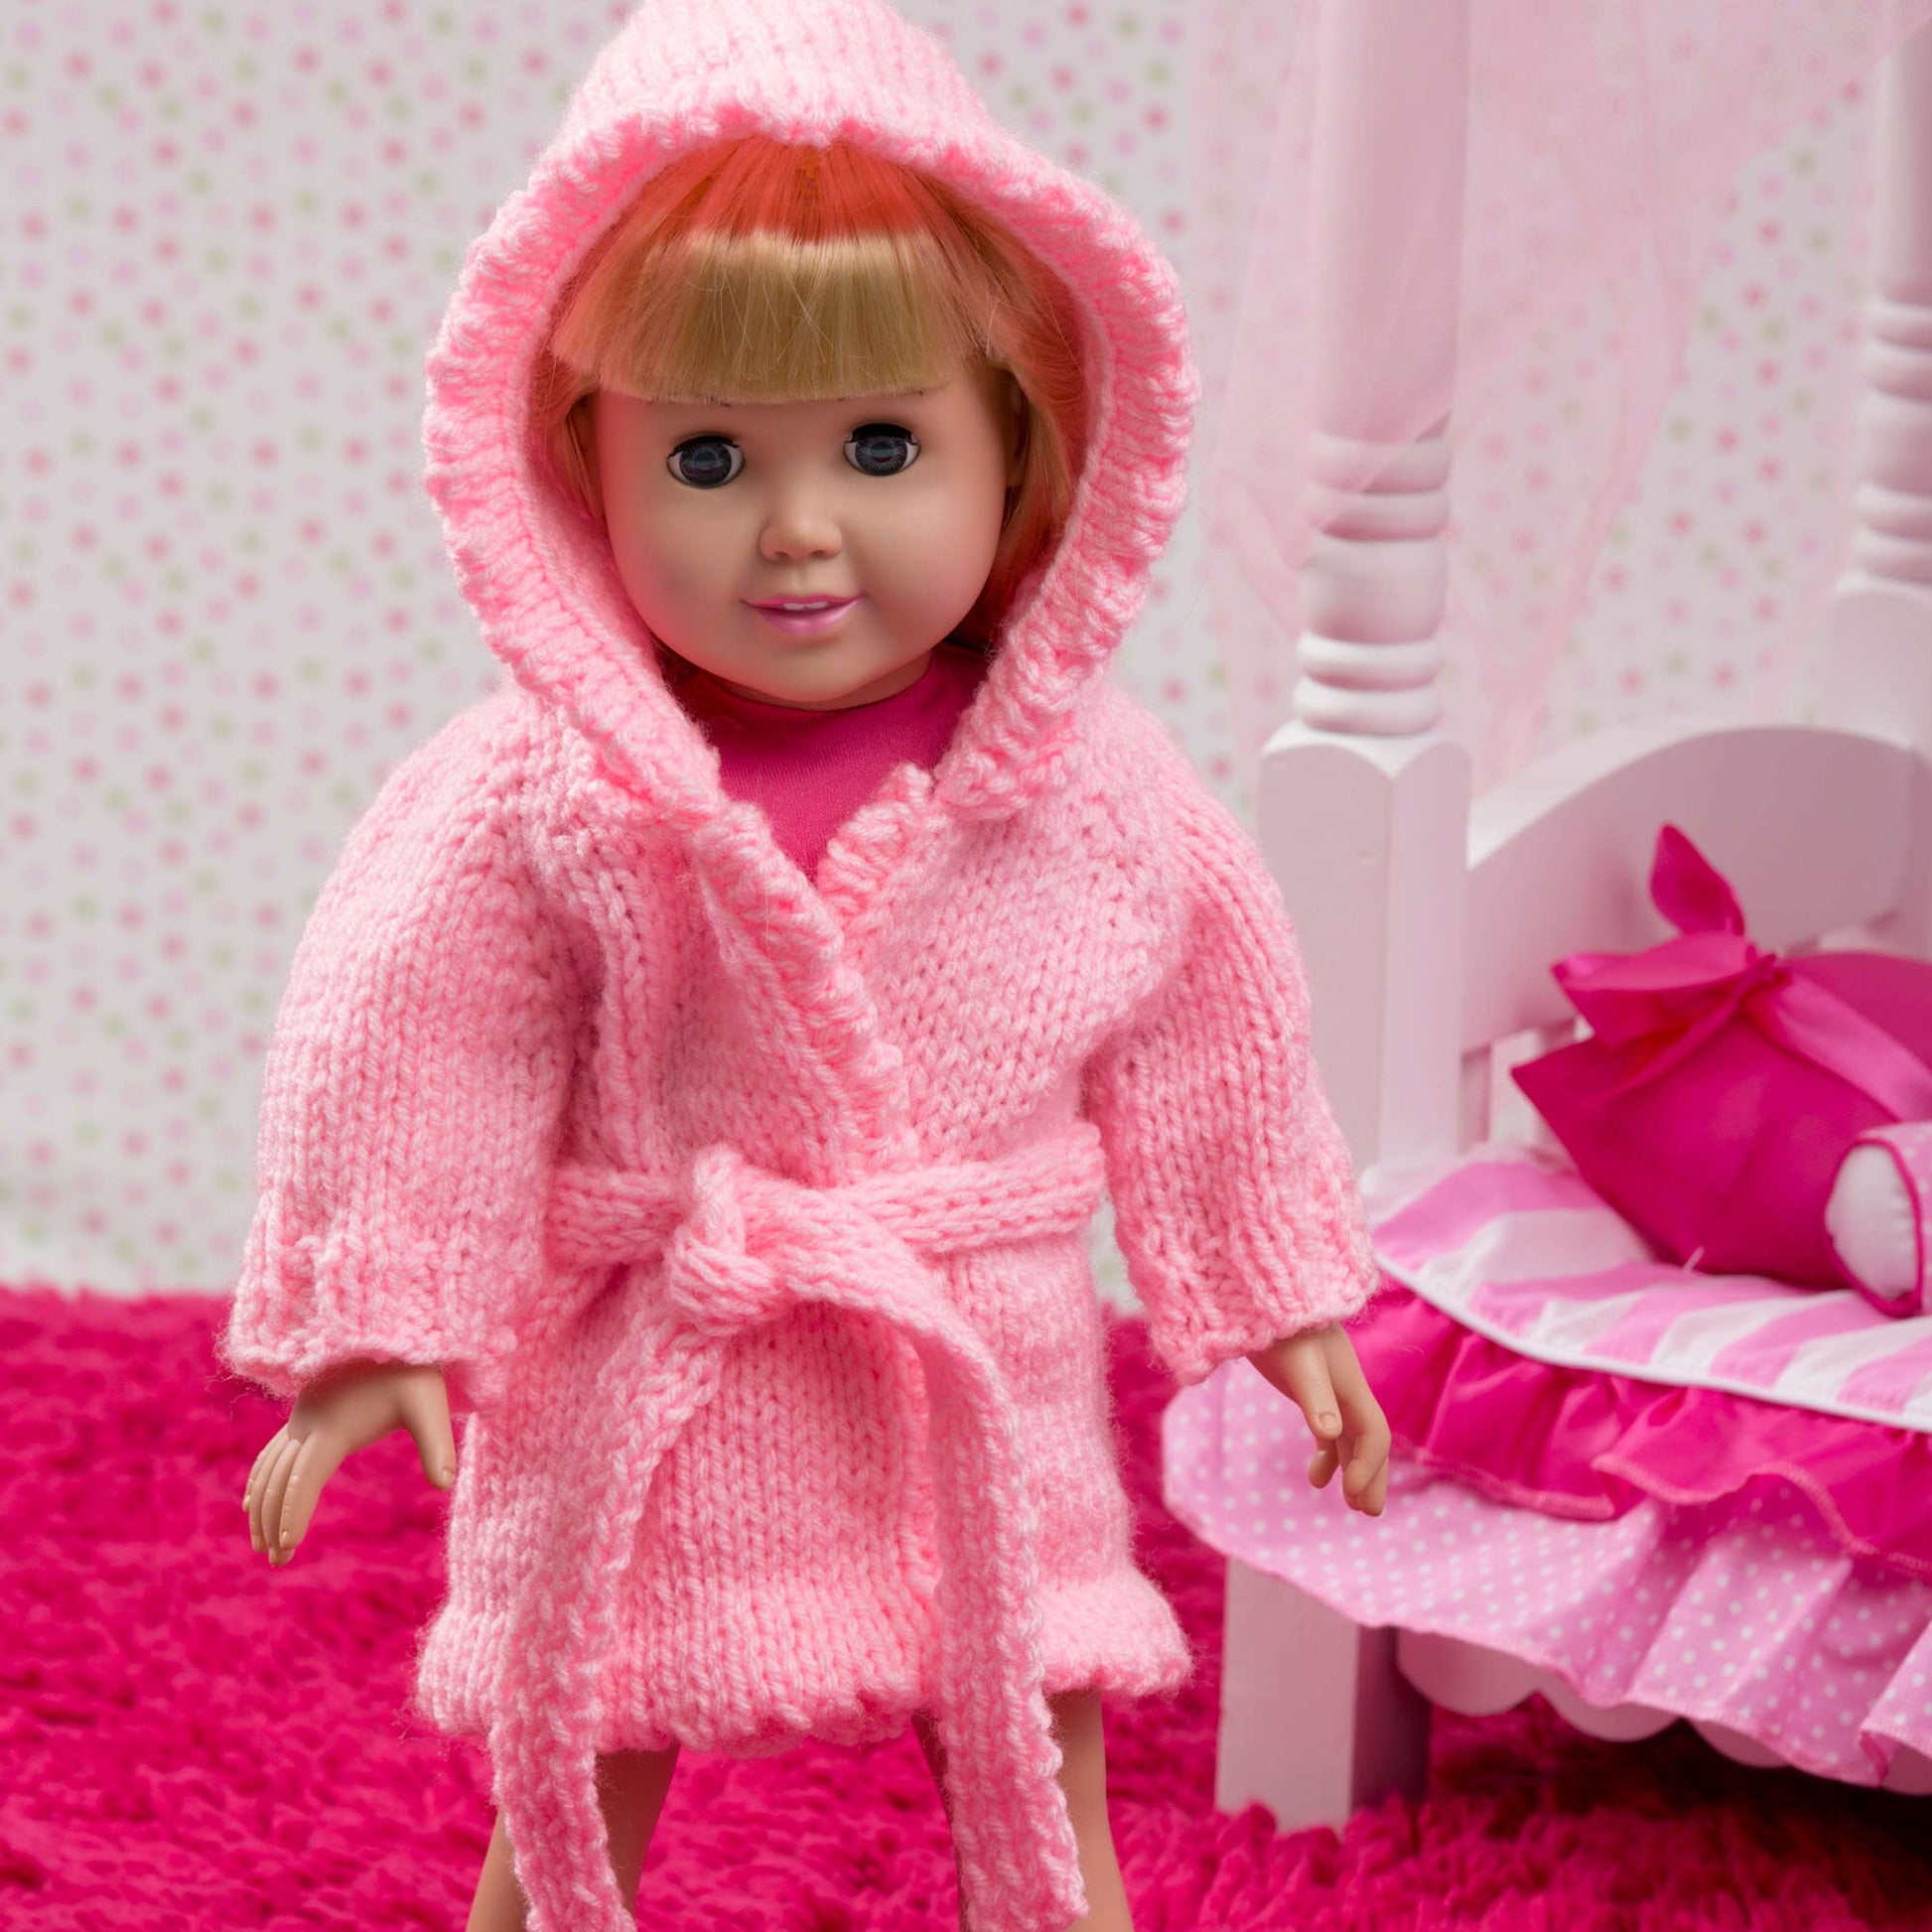 Free Red Heart Doll Robe And Bunny Slippers Pattern